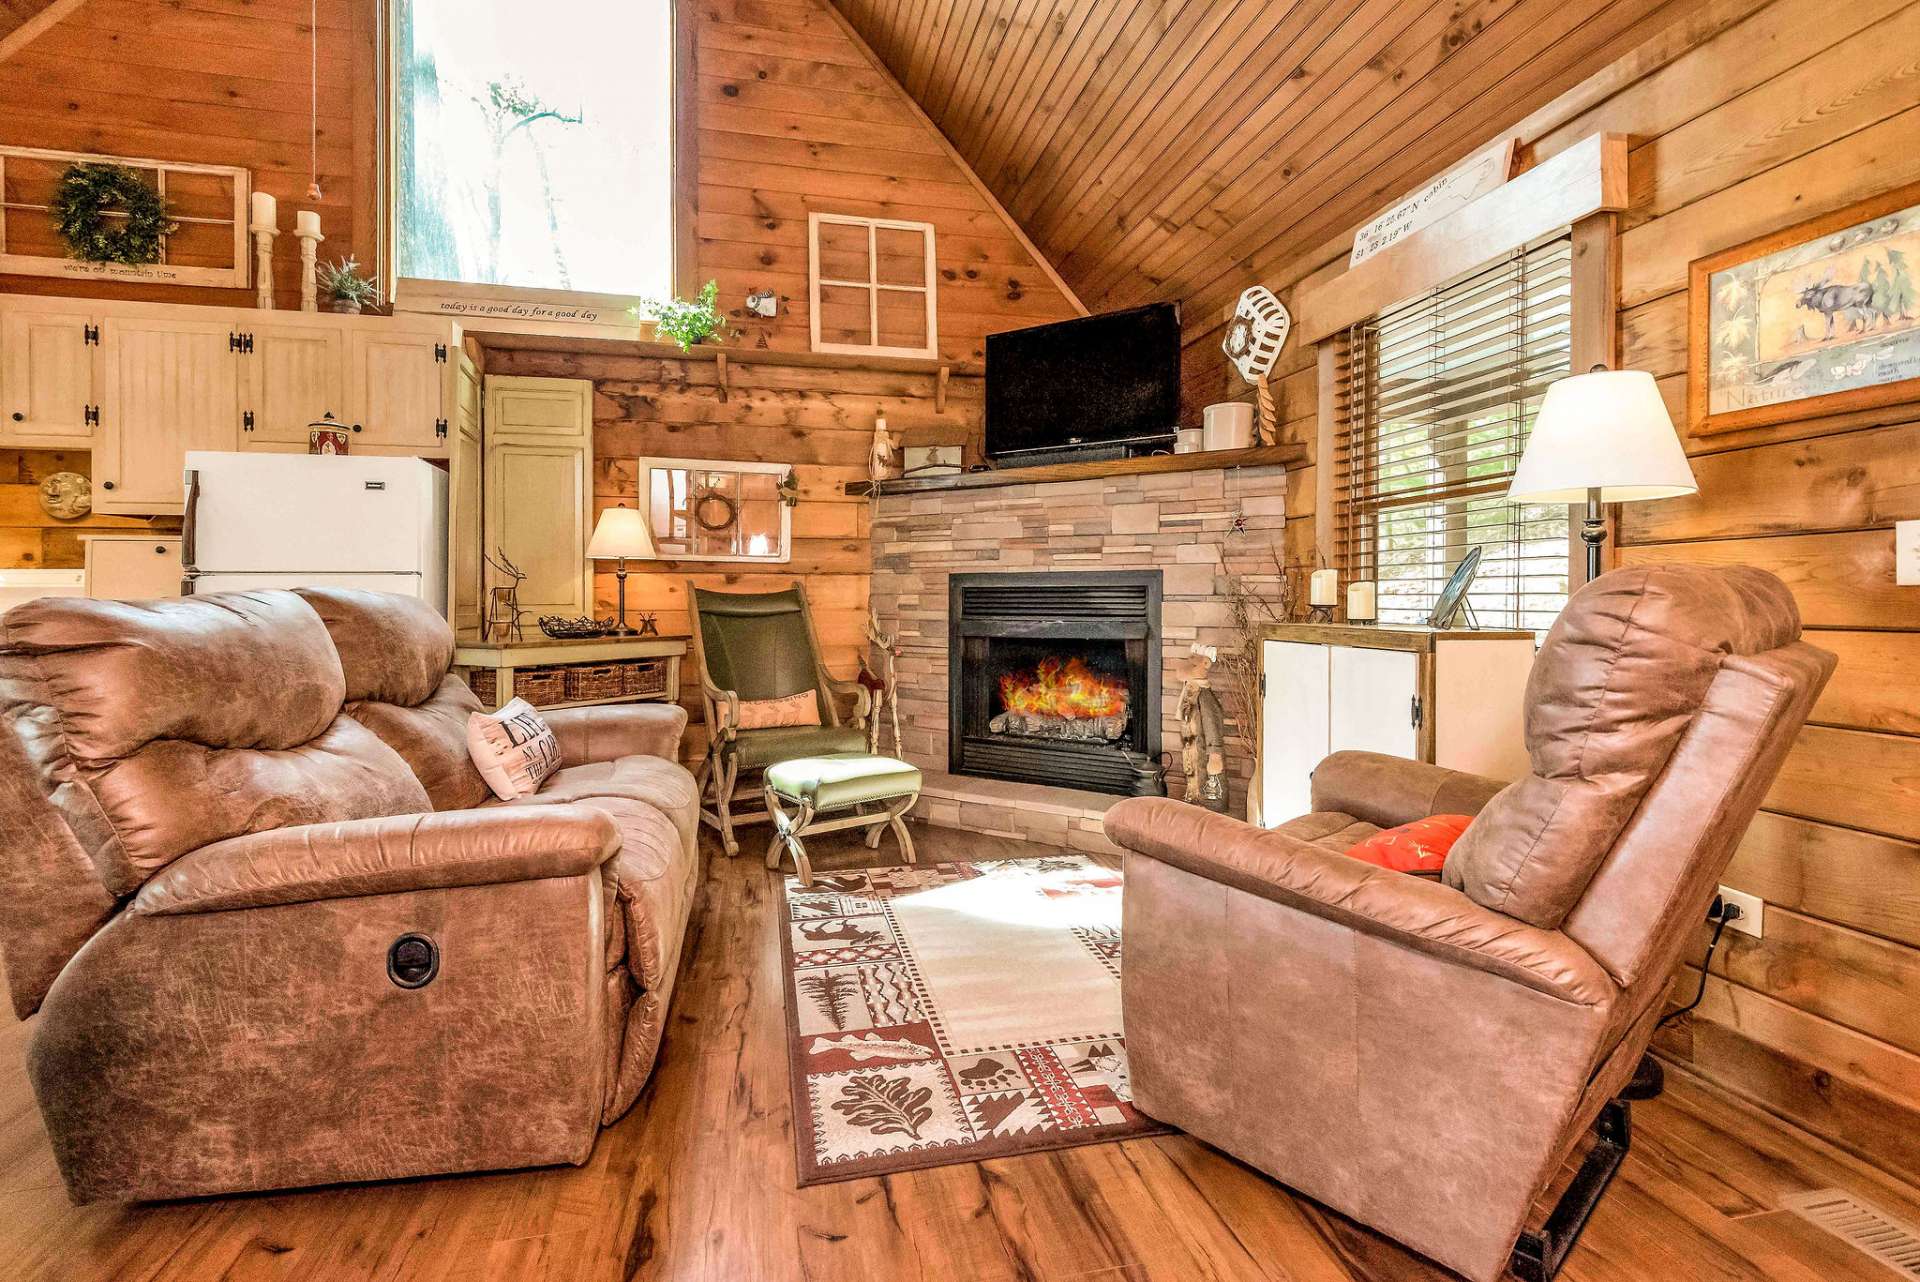 Comfortable furniture in the family room stays with the cabin.